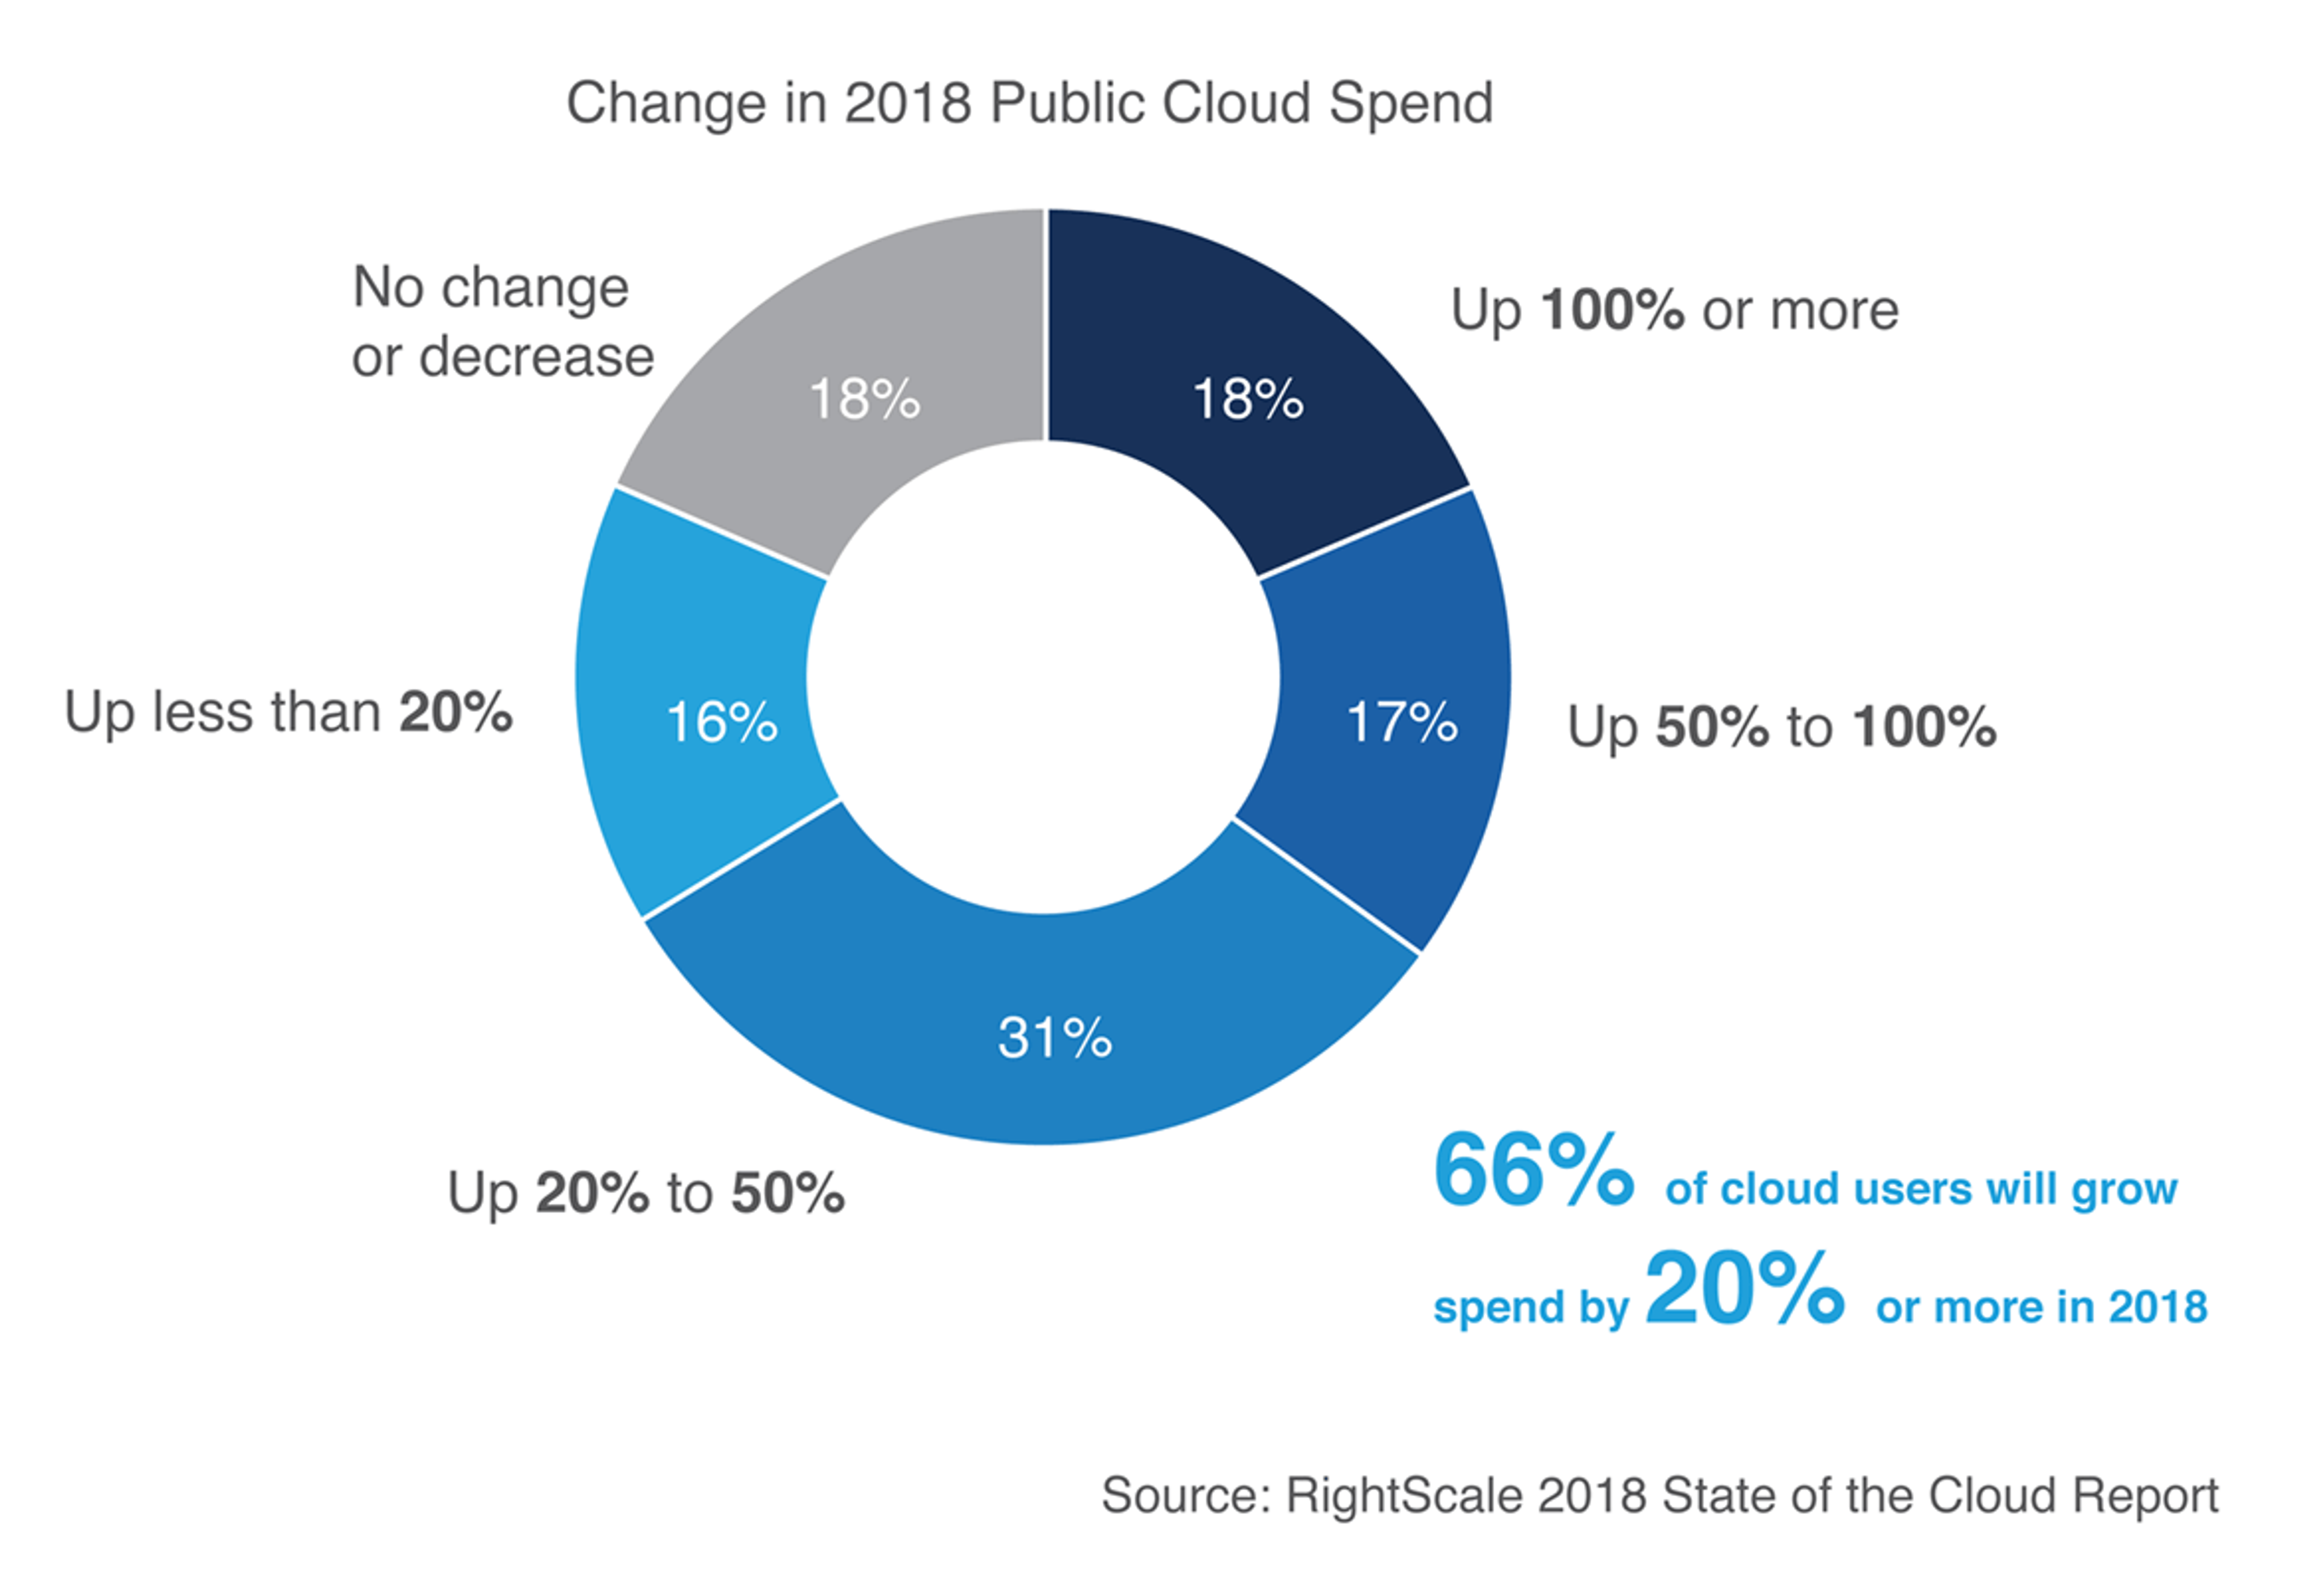 Hybrid cloud trends and increased adoption